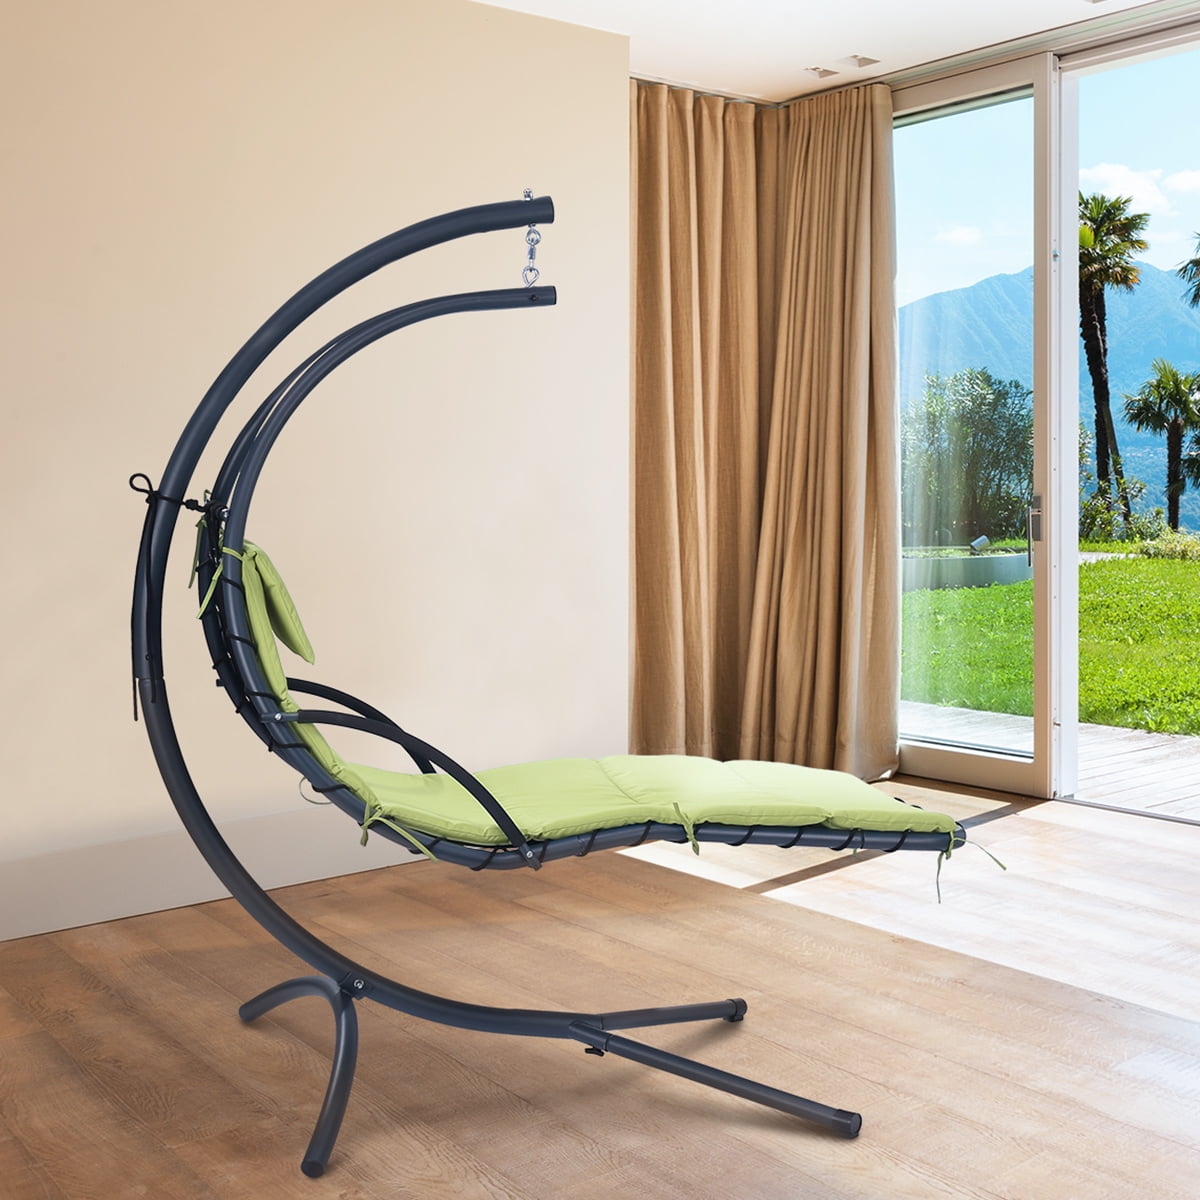 Hanging Chaise Lounge Chair Outdoor Indoor